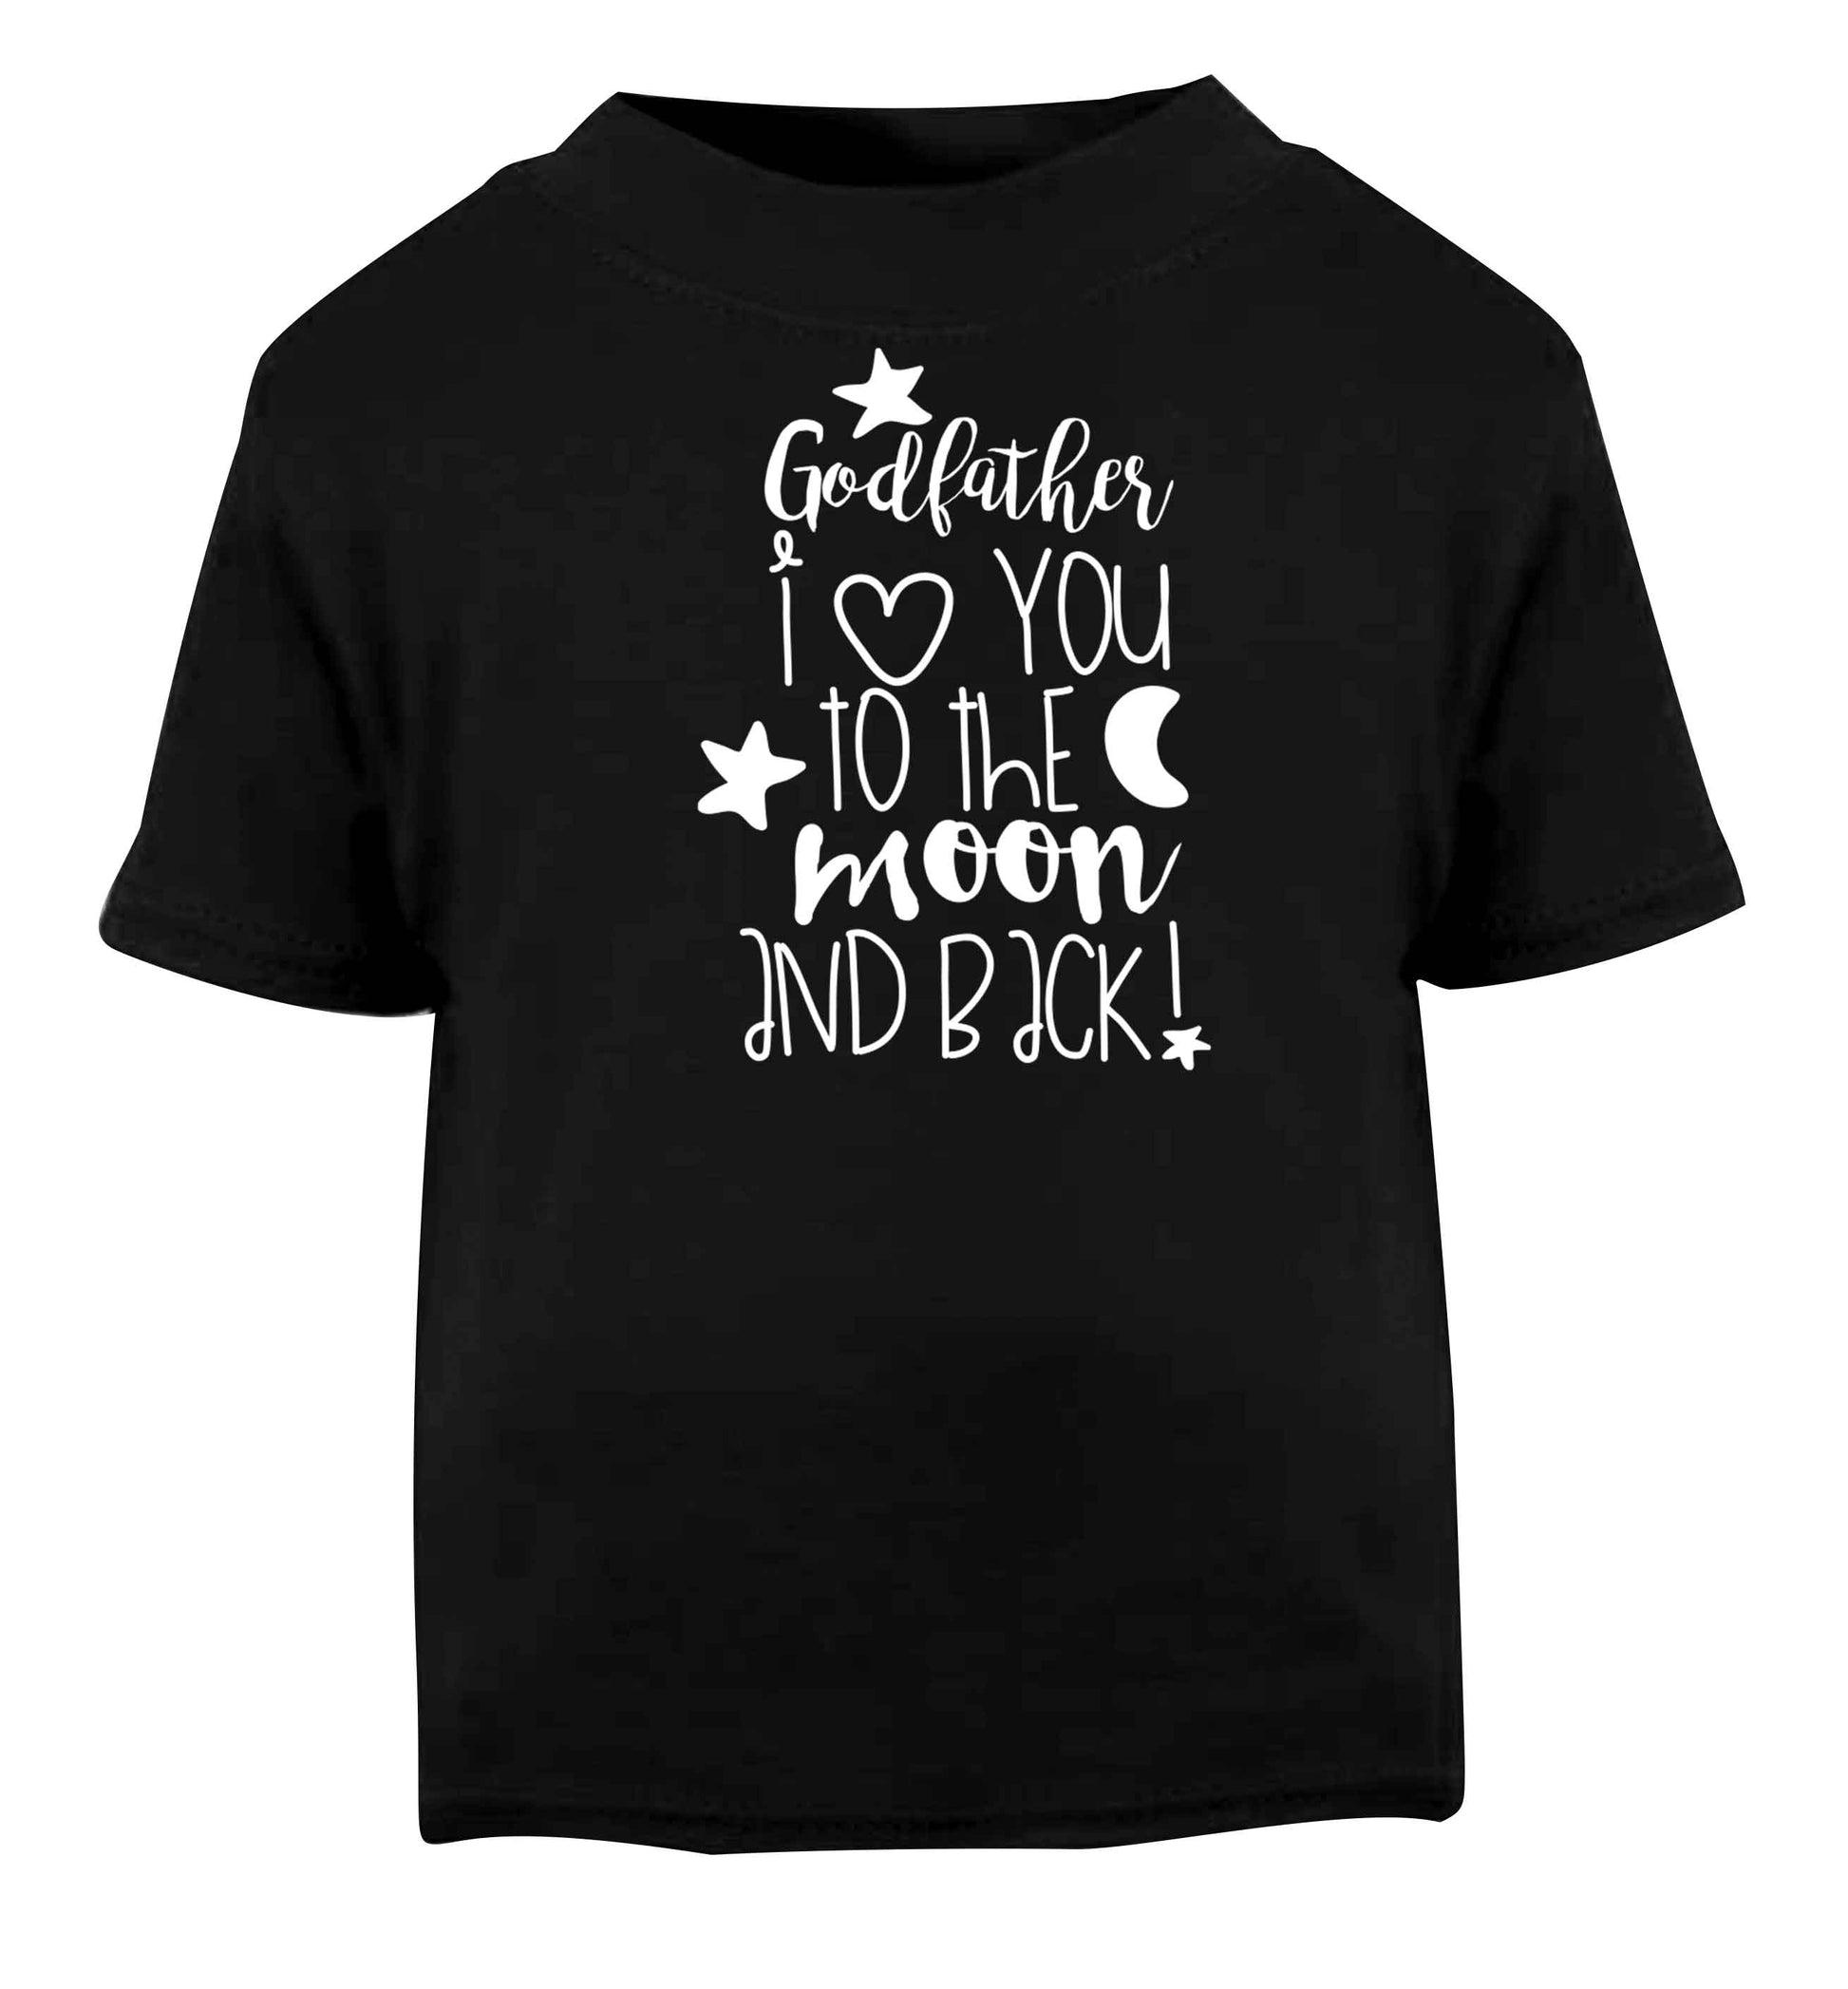 Godfather I love you to the moon and back Black baby toddler Tshirt 2 years